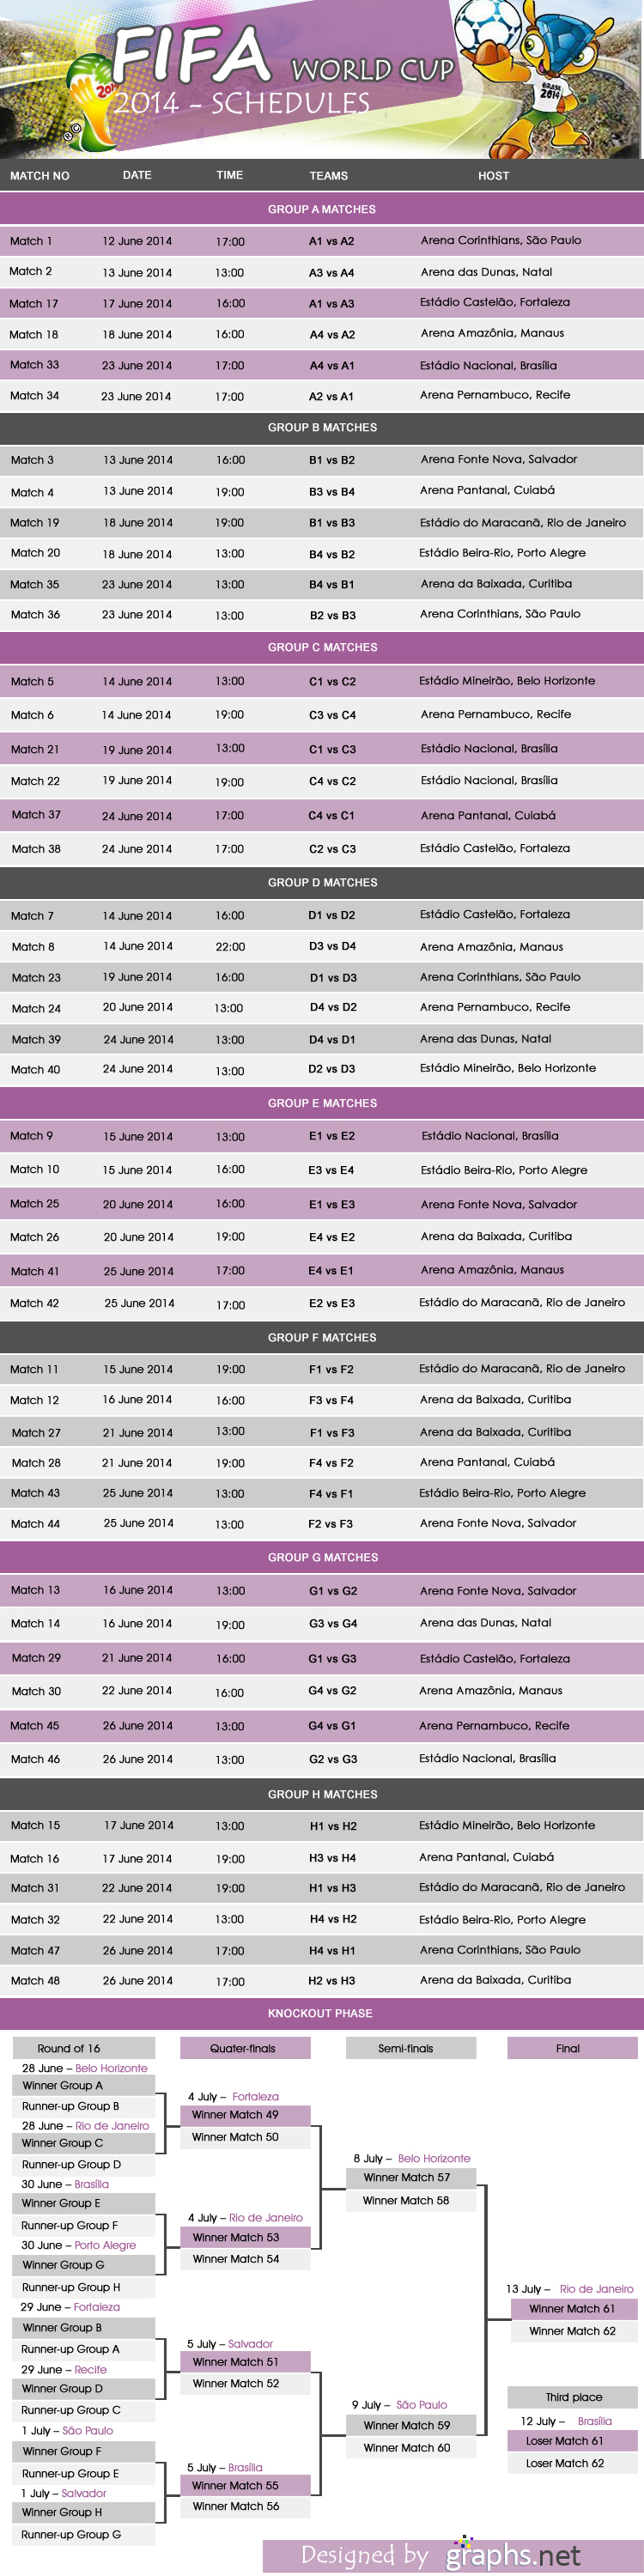 FIFA World Cup 2014 Schedule